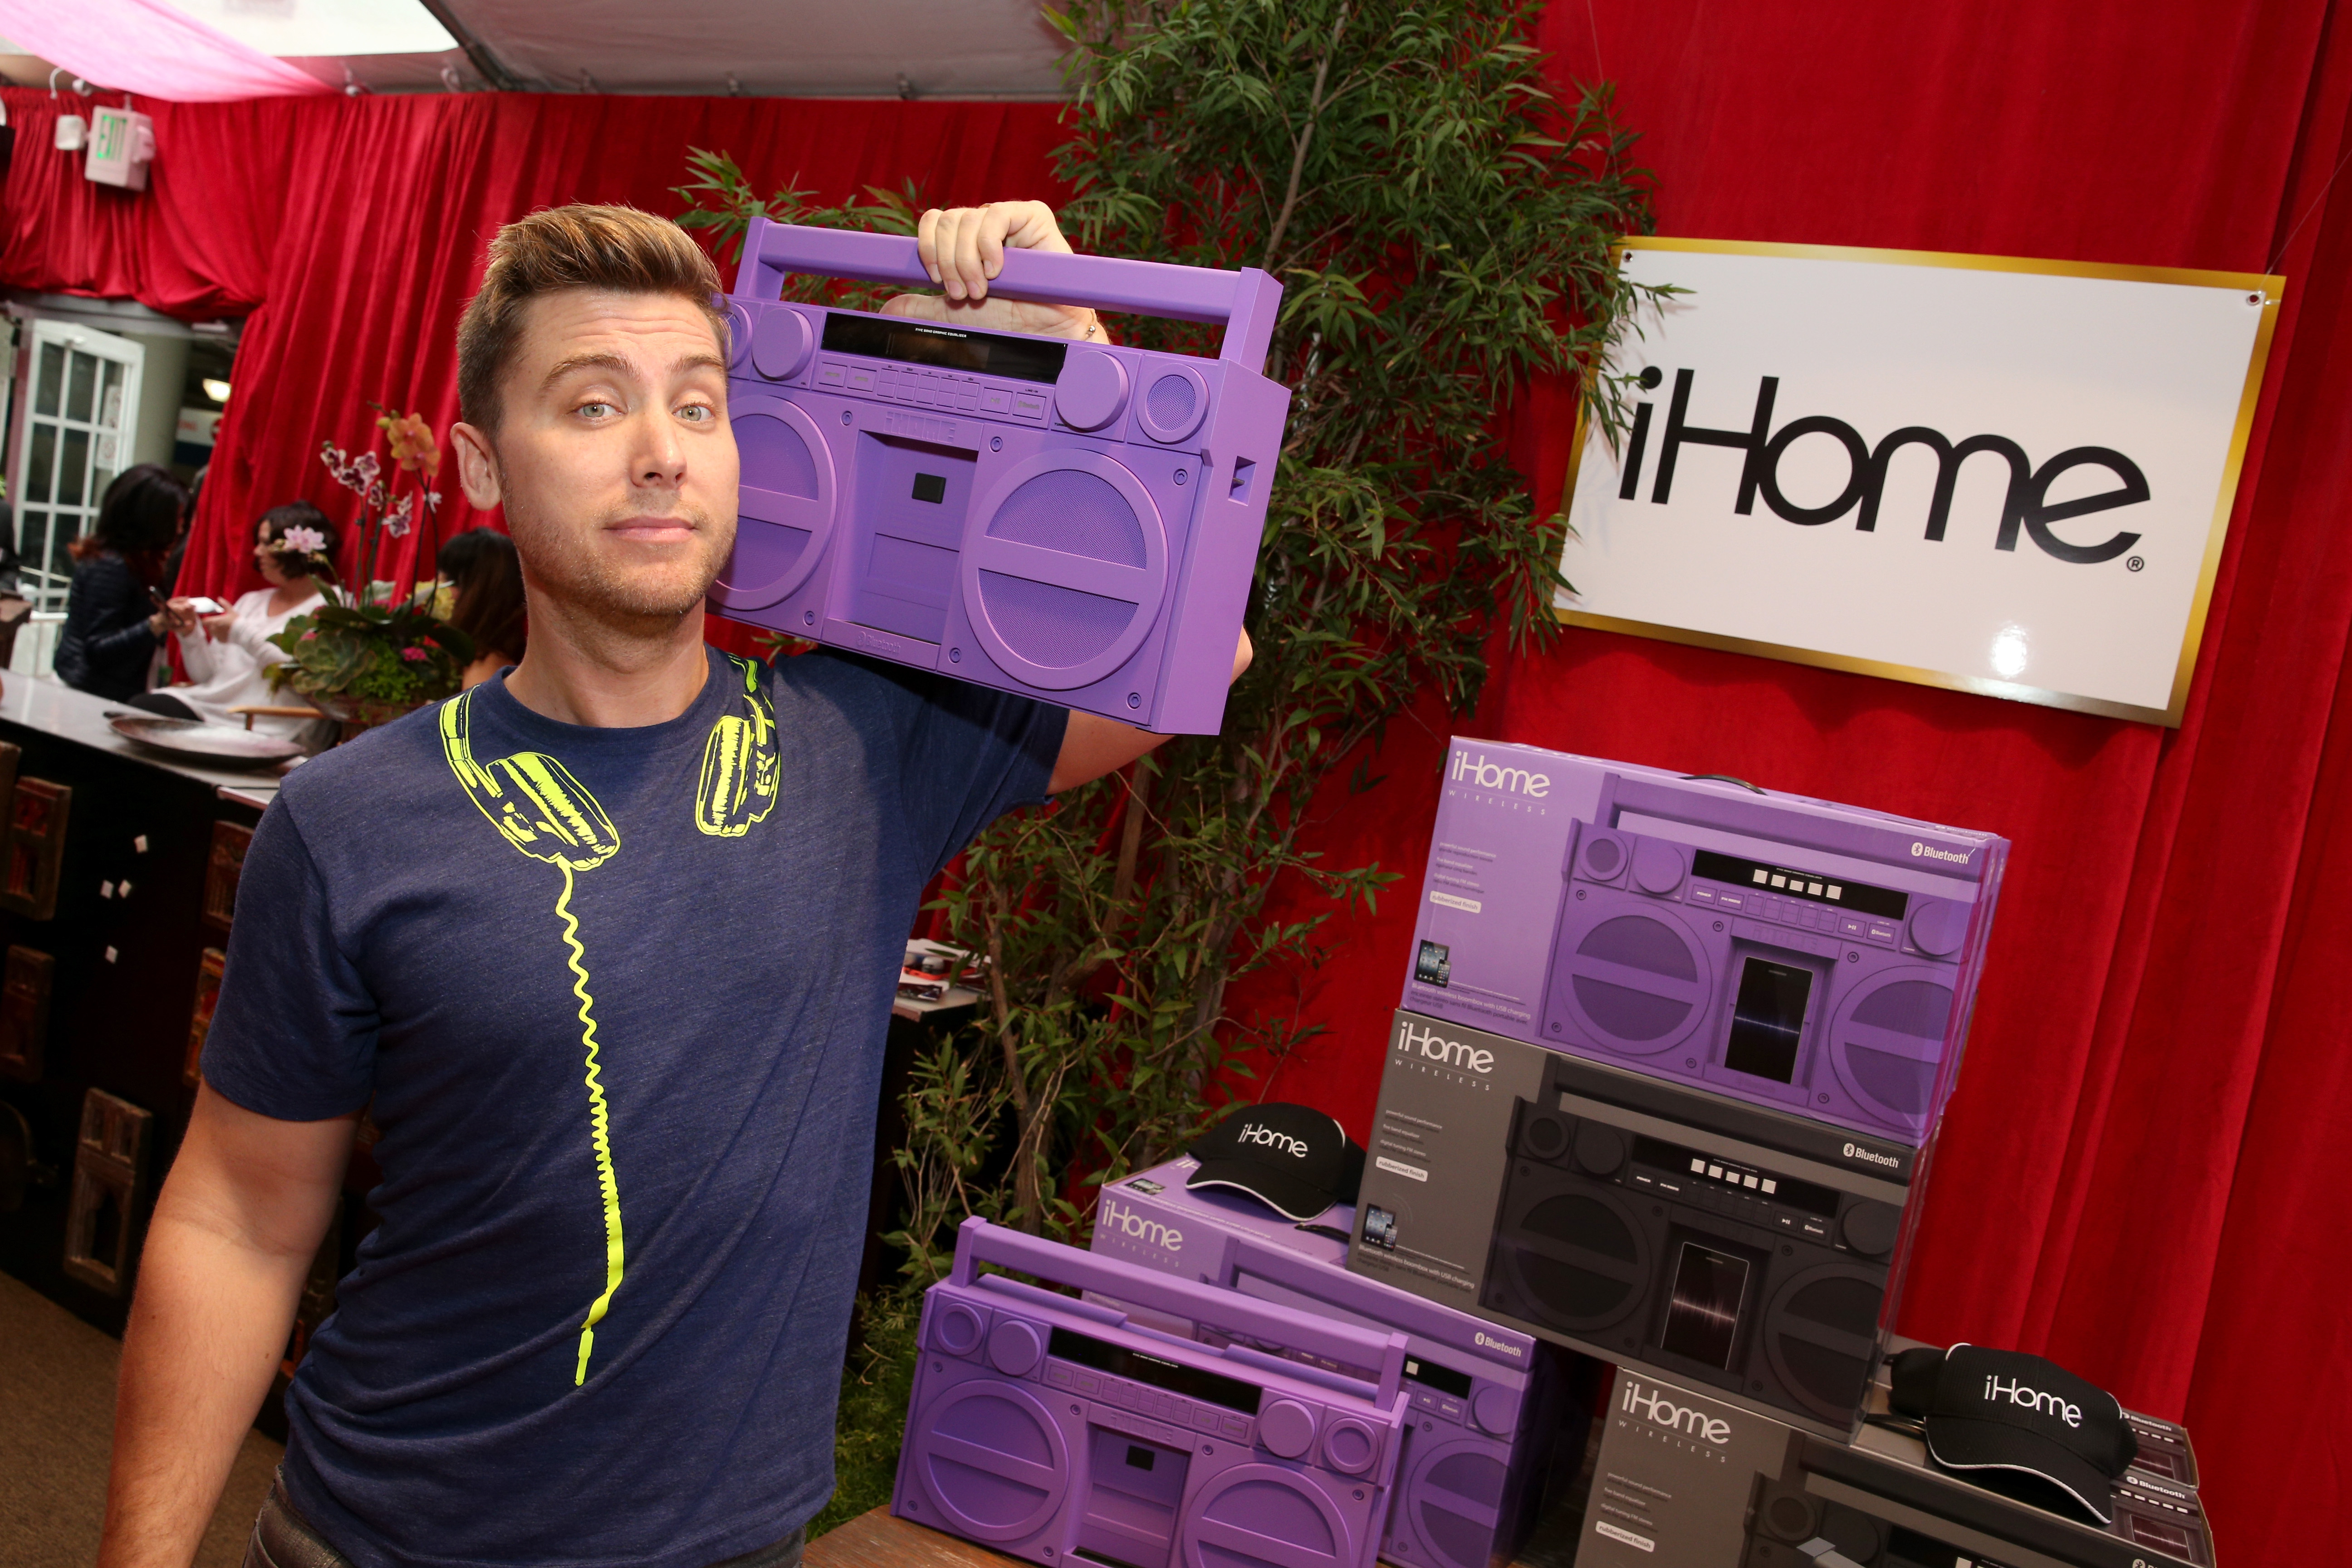 Recording artist Lance Bass attends the GRAMMY Gift Lounge during the 56th Grammy Awards at Staples Center on January 24, 2014 in Los Angeles, California.  (Photo by Imeh Akpanudosen/WireImage)